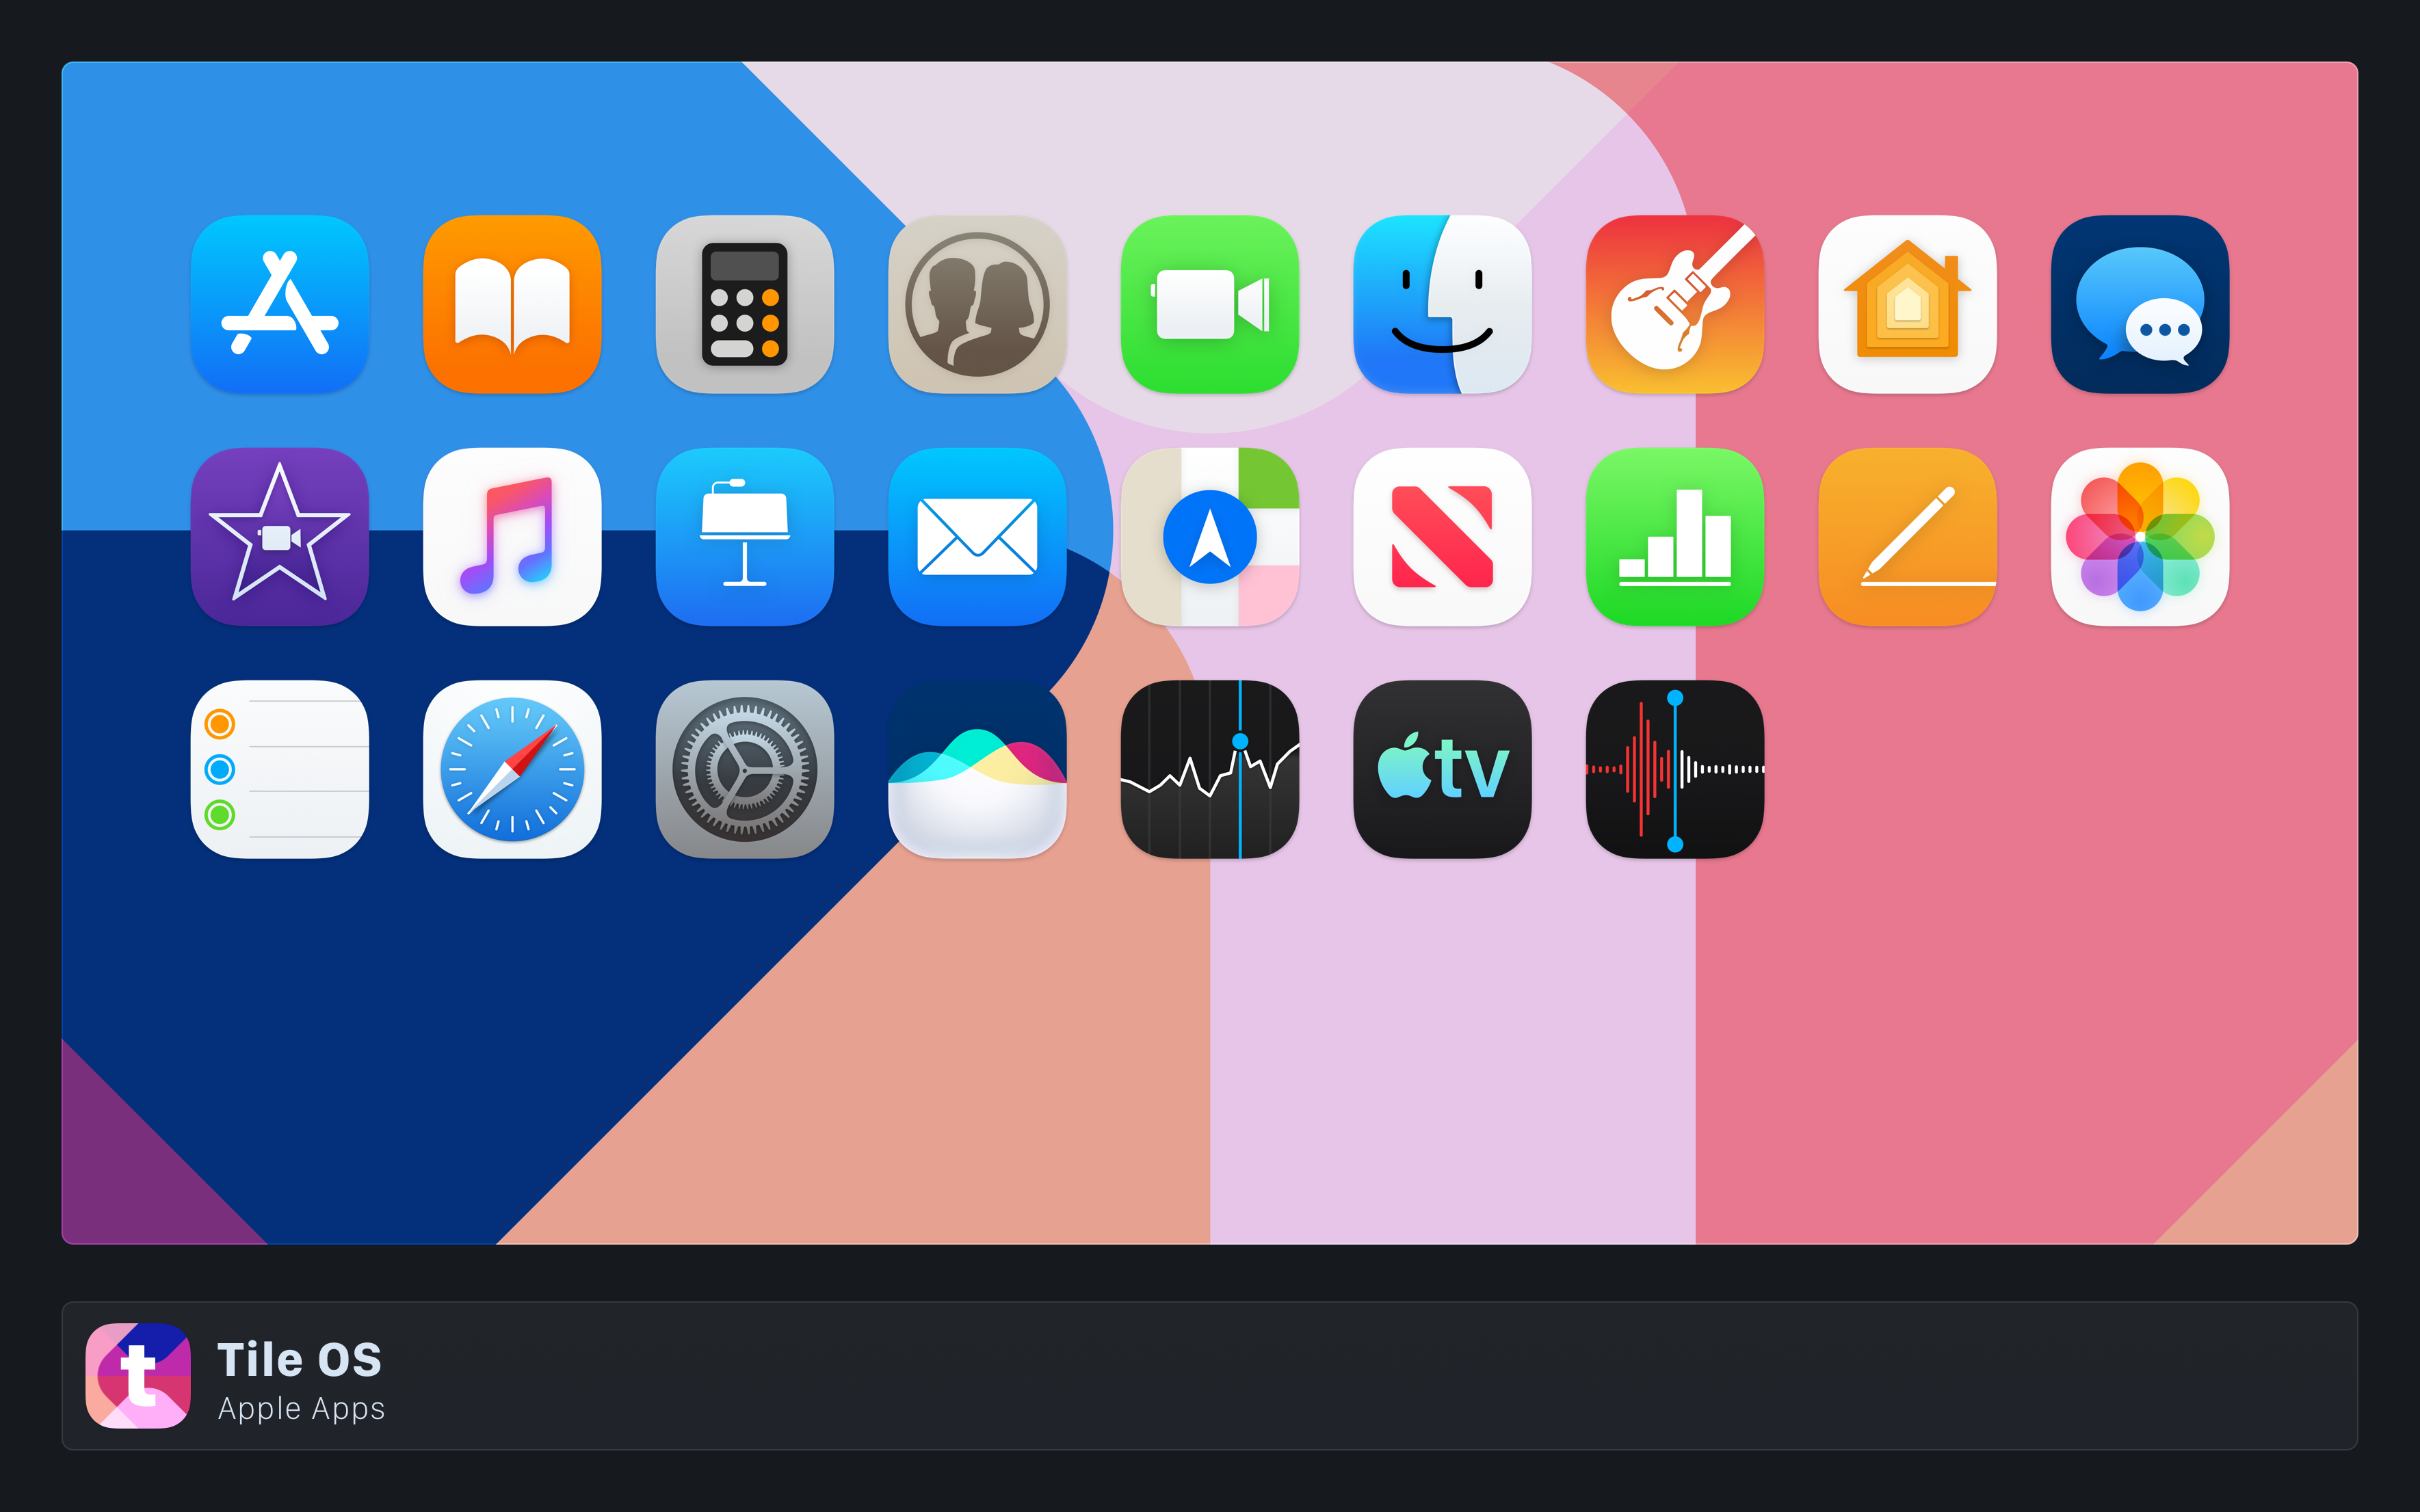 Tile OS - Part 1: Apple Apps Icons